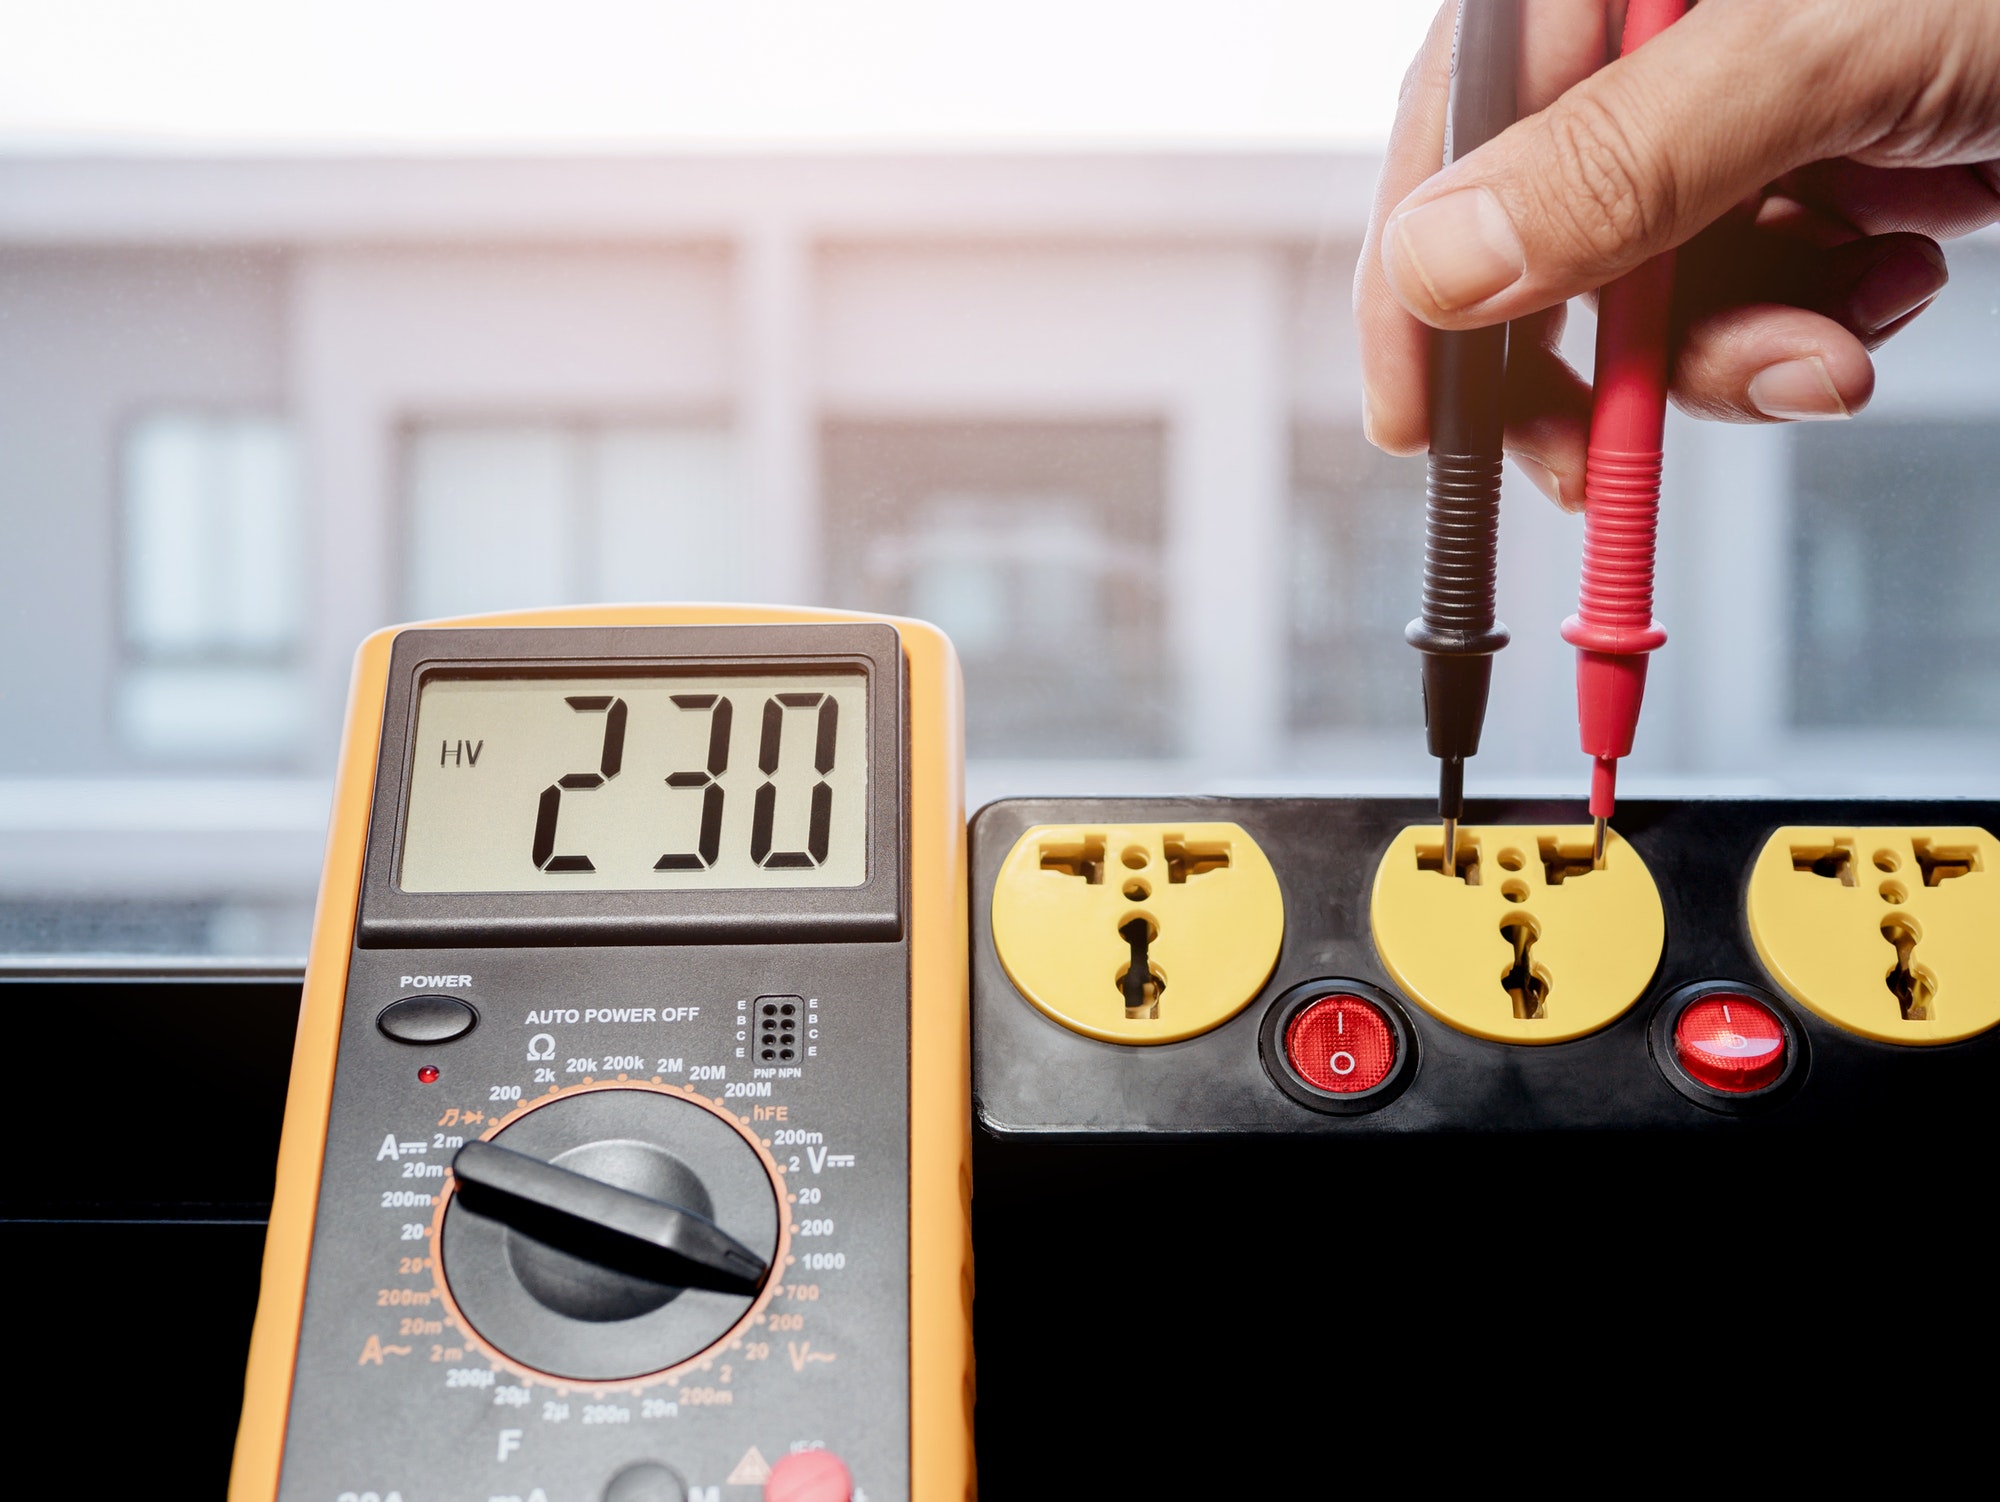 Measure the AC voltage of 230 Volts from the power outlet with a digital meter.